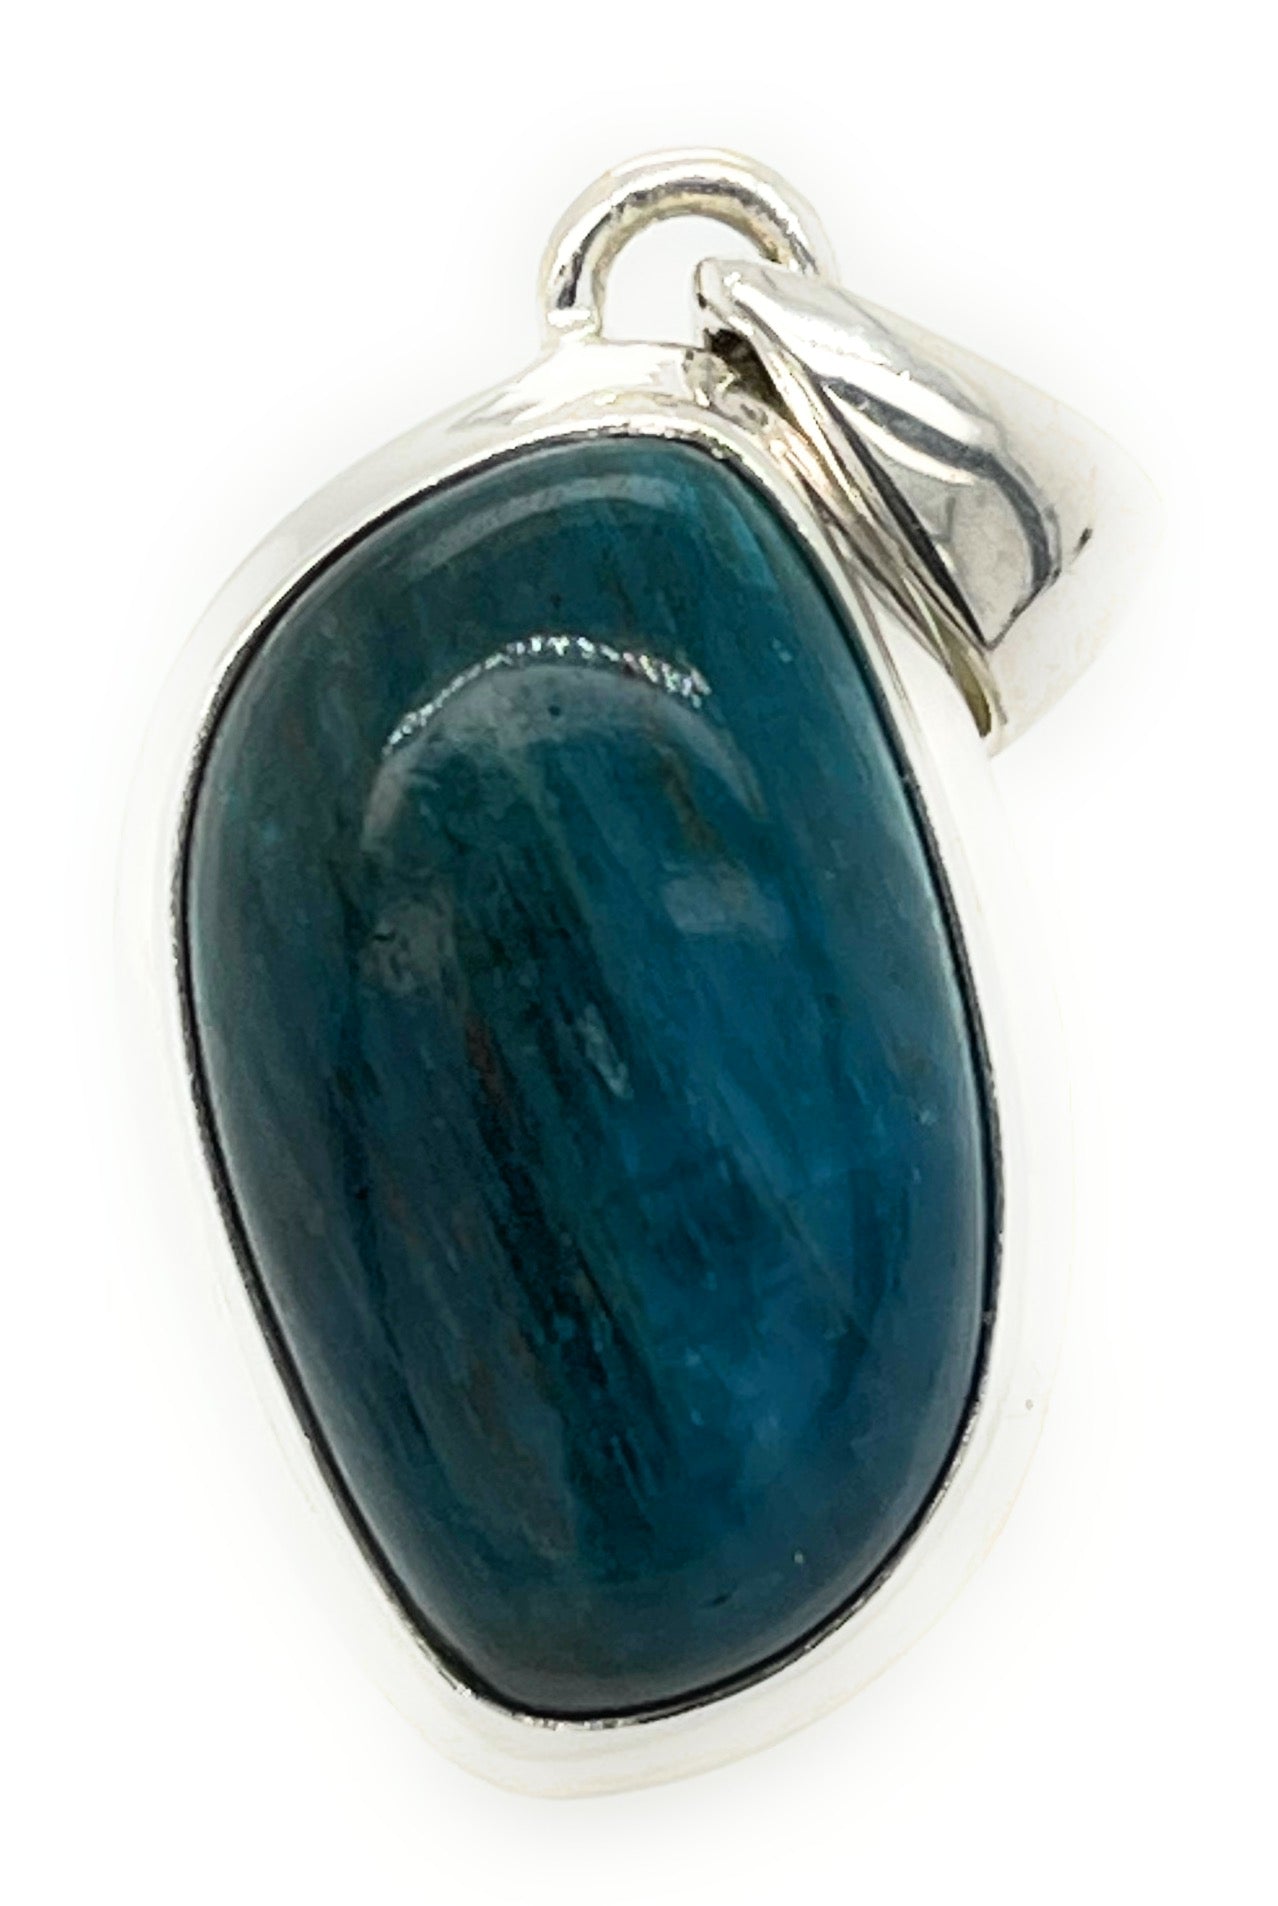 Genuine Neon Blue Apatite 925 Solid Sterling Silver Pendant 30mm - Natural Rocks by Kala